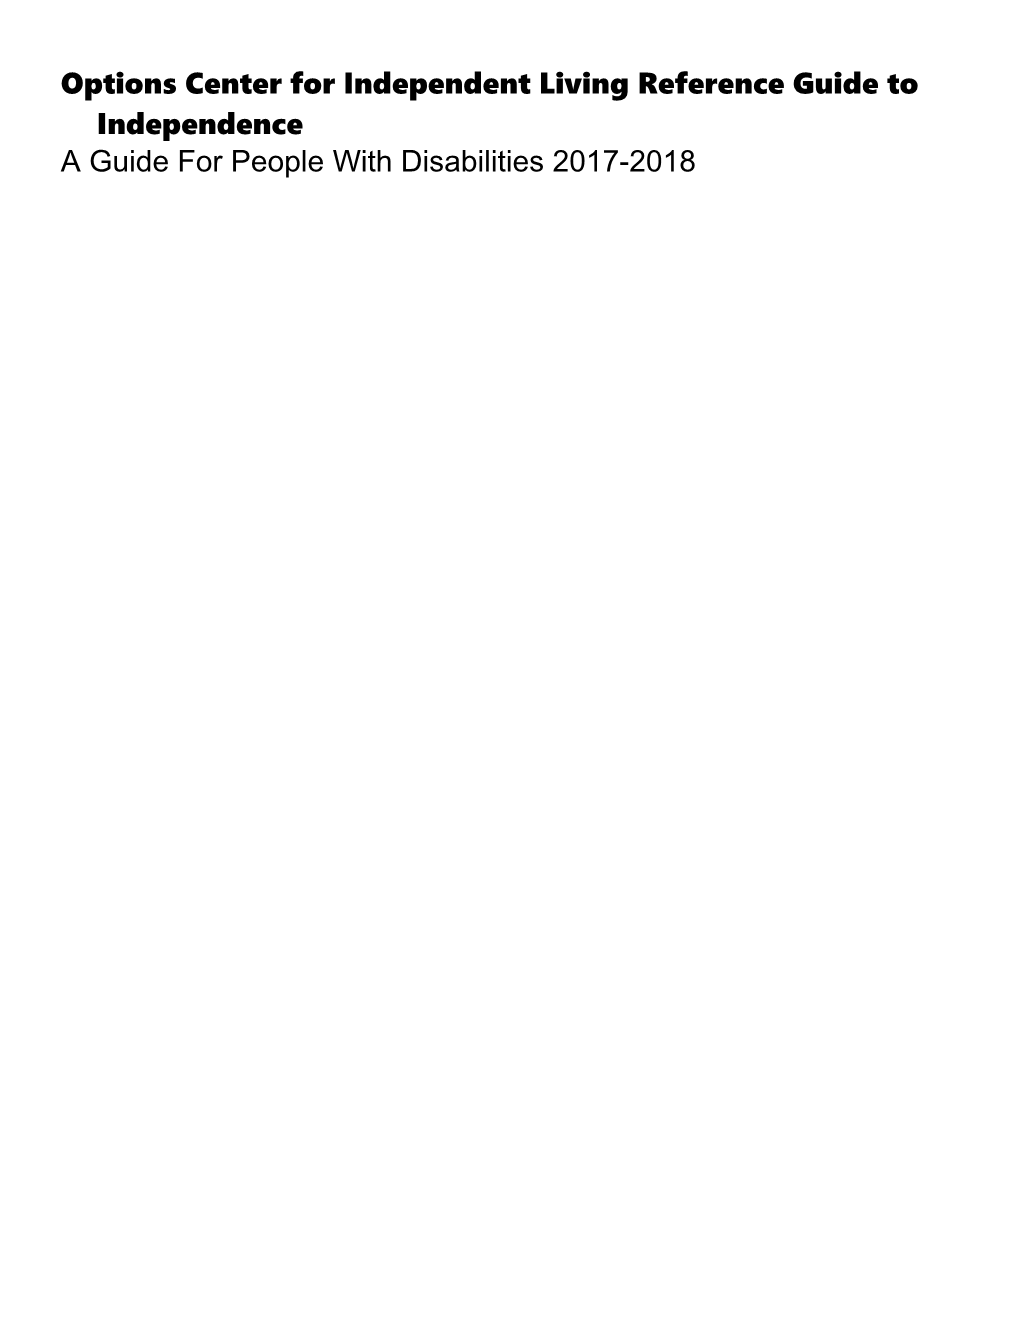 Options Center for Independence Reference Guide to Independence 2017-2018